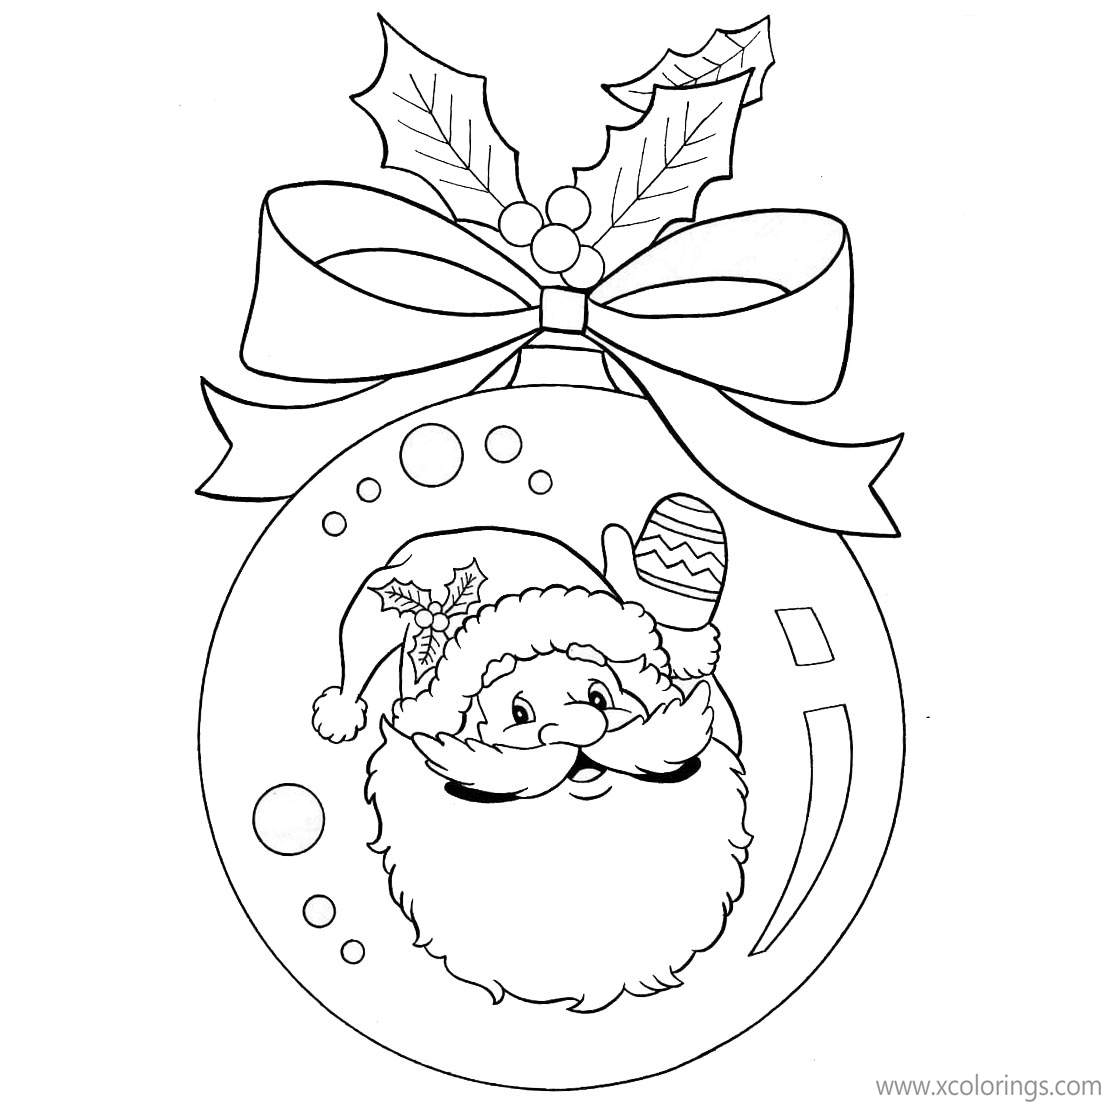 Free Christmas Ornament with Santa Claus Coloring Pages printable